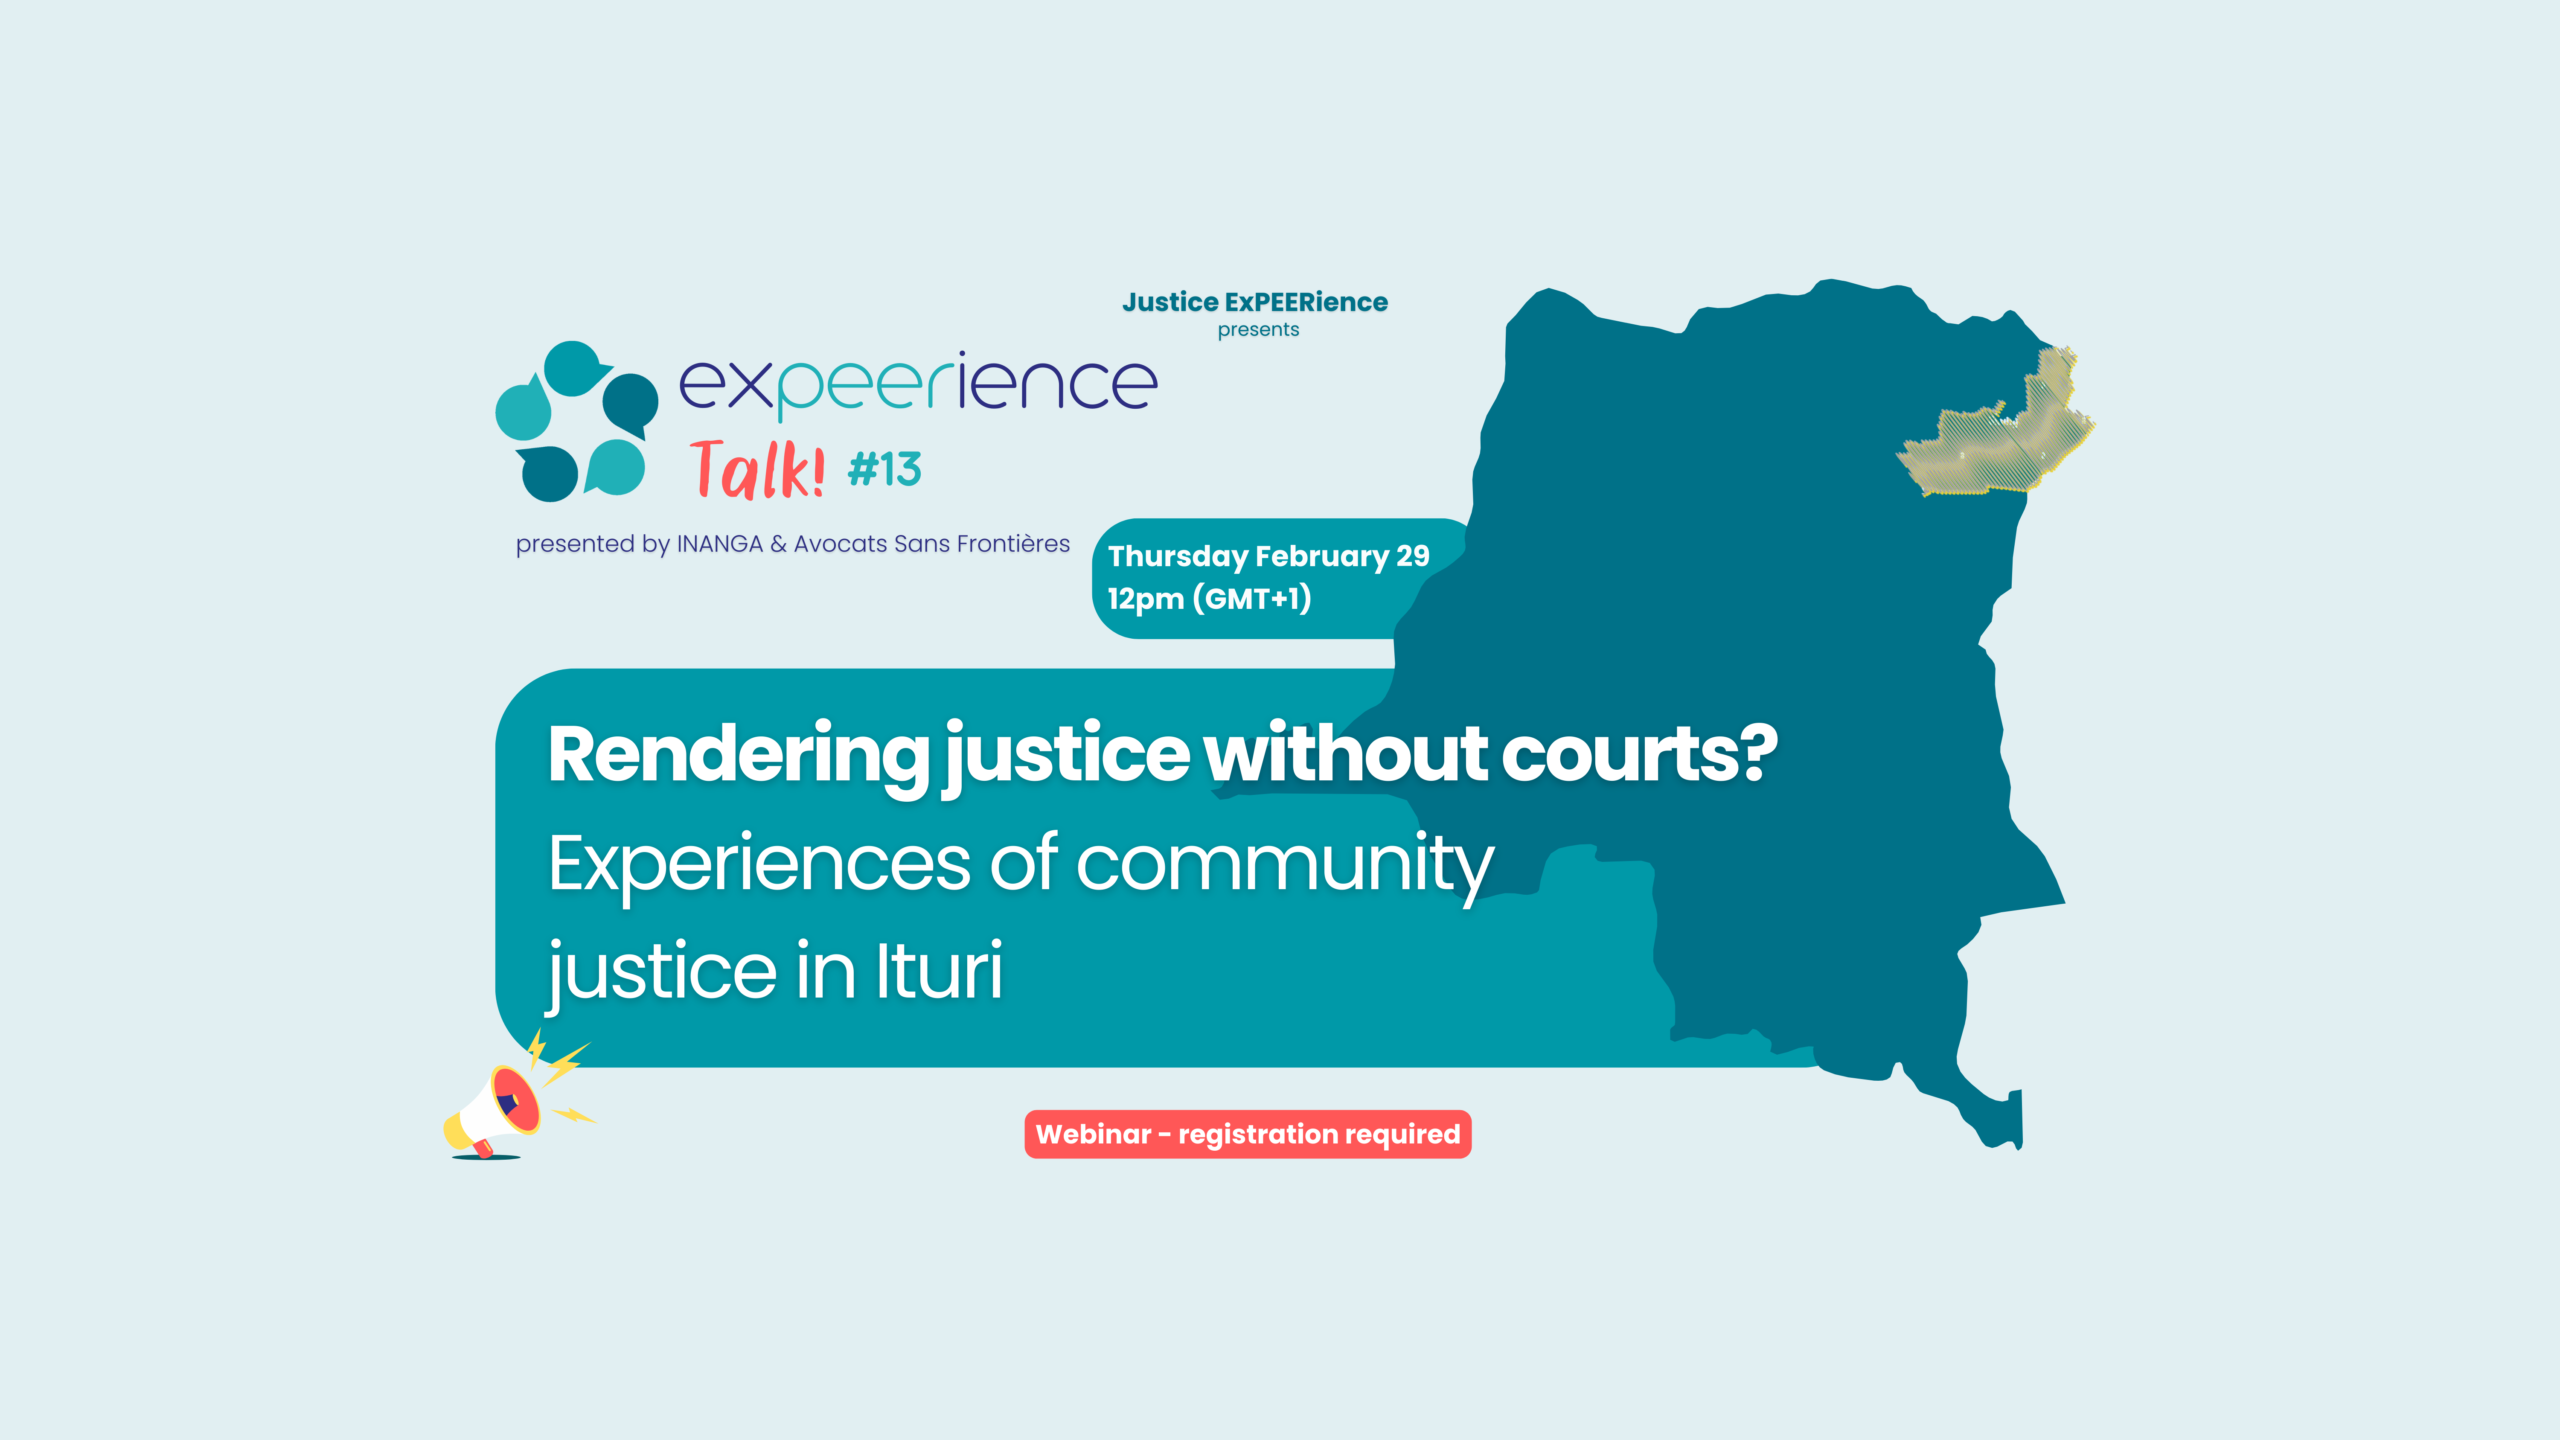 ExPEERience #13: Rendering justice without courts? Experiences of community justice in Ituri